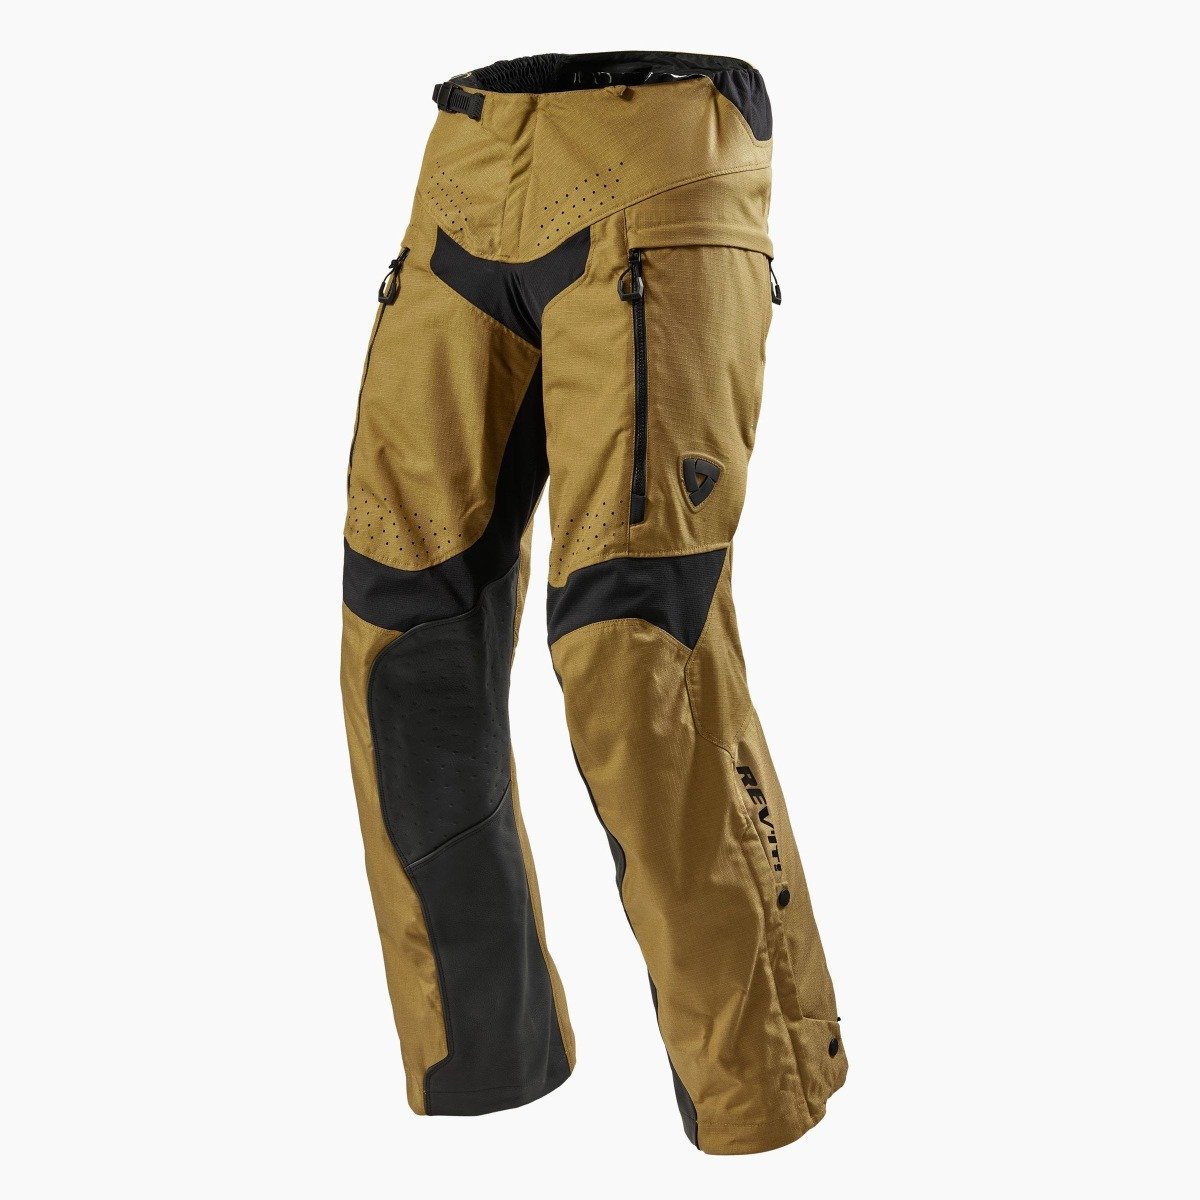 Image of REV'IT! Continent Short Ocher Yellow Motorcycle Pants Size XL ID 8700001297257